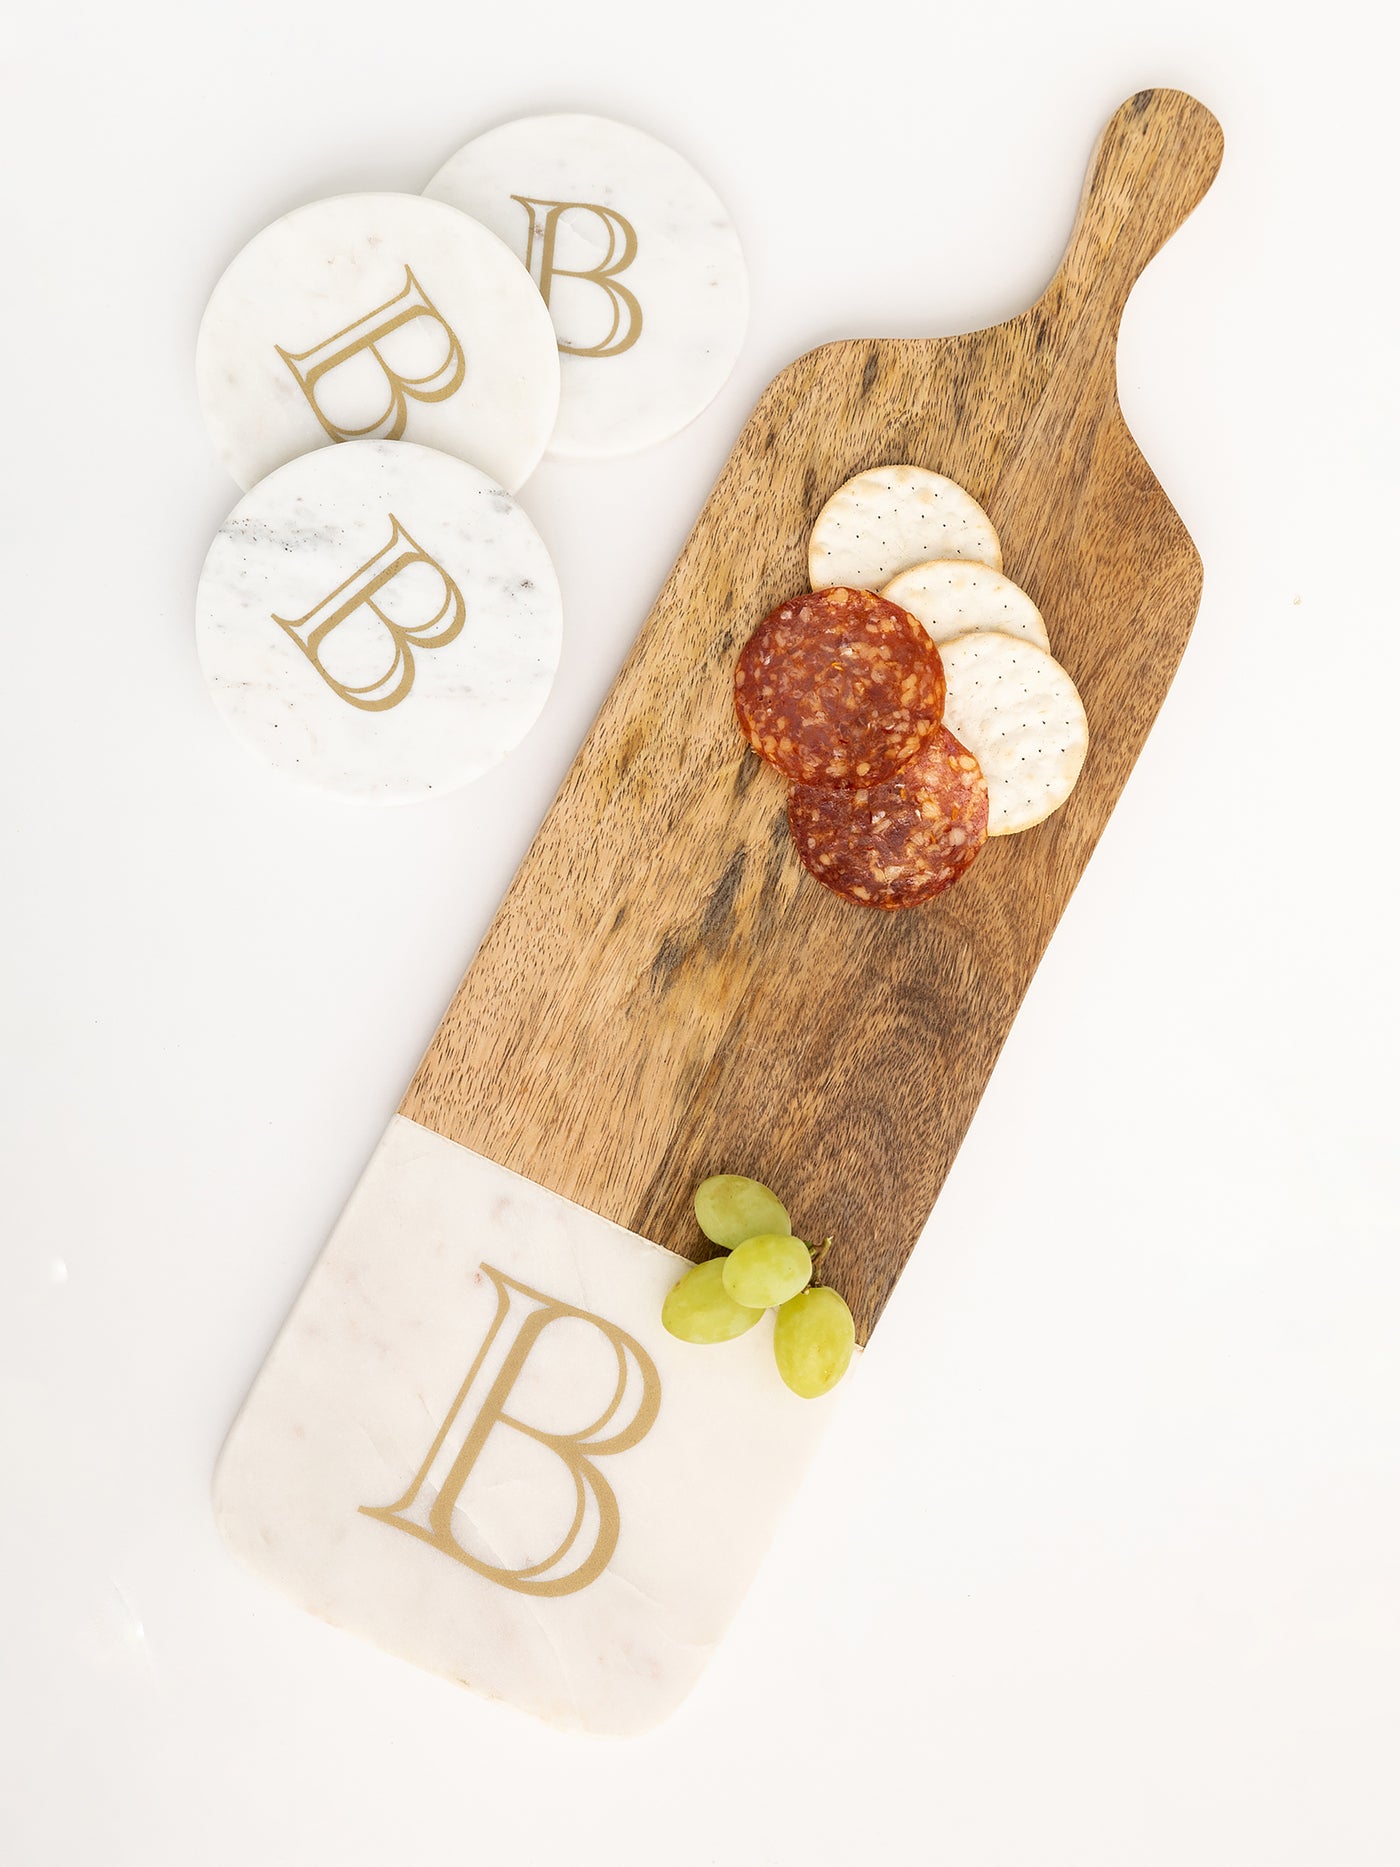 Initial | Marble and Wood Charcuterie Board - Mary Square, LLC